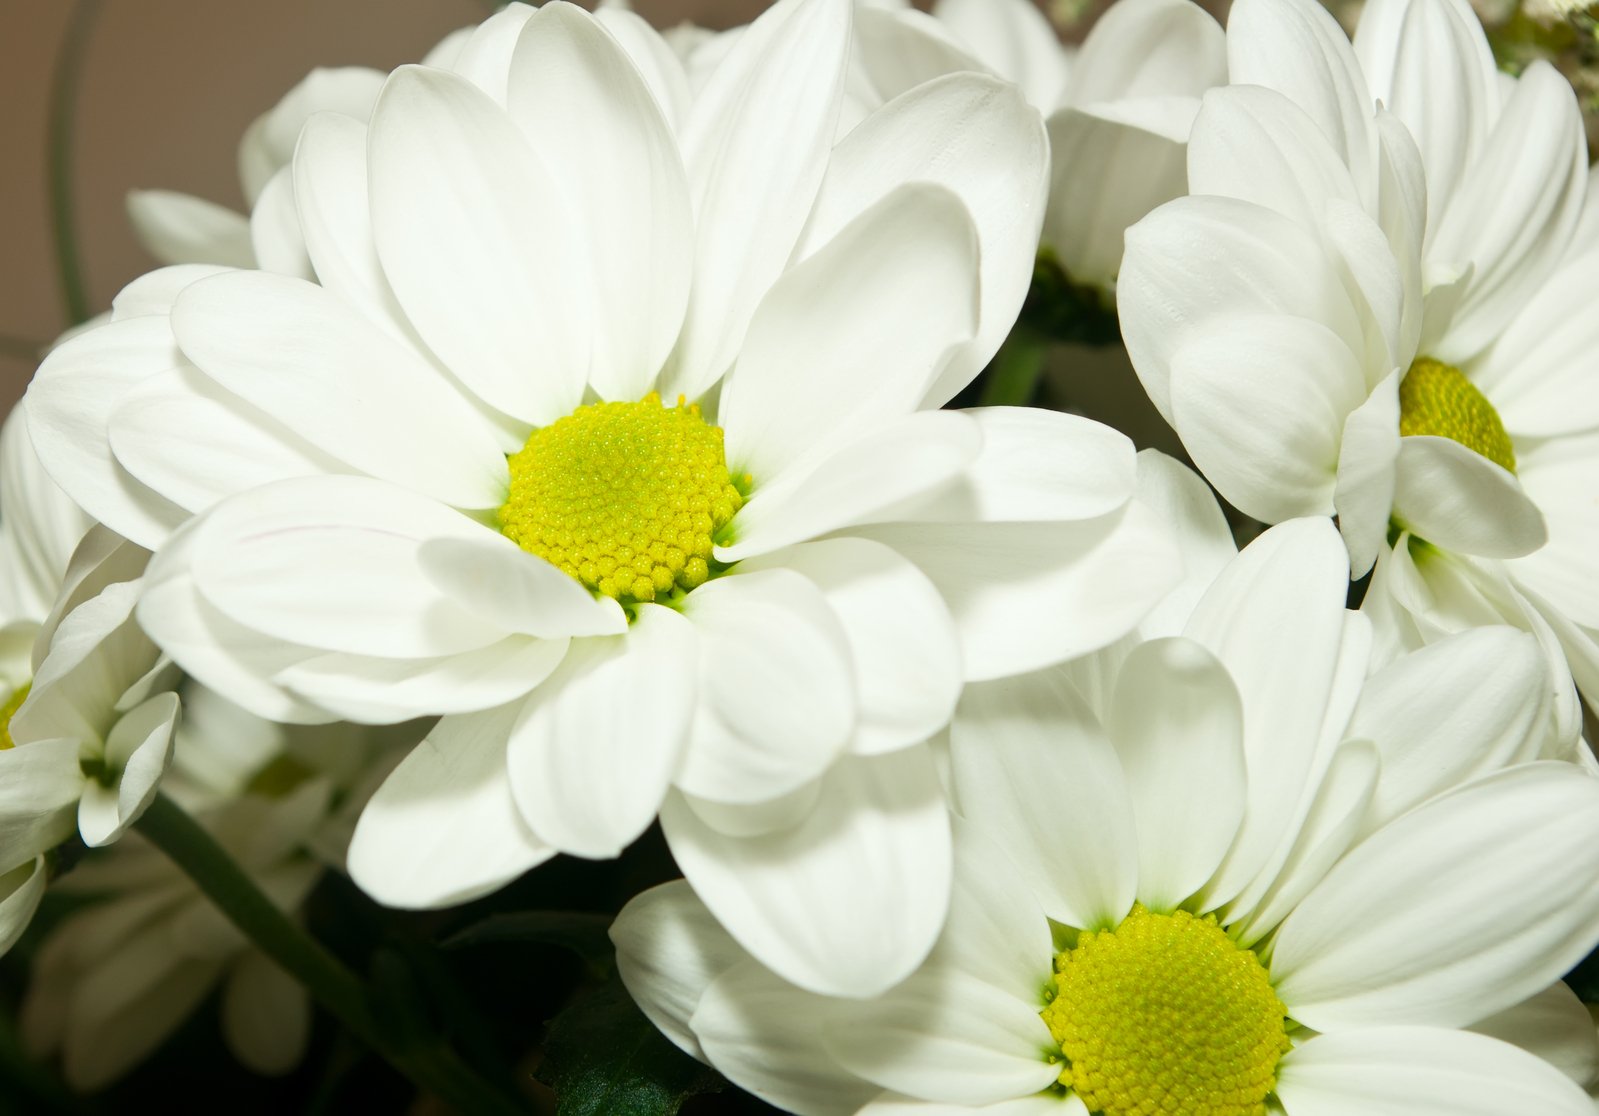 a large bunch of white flowers with green centers